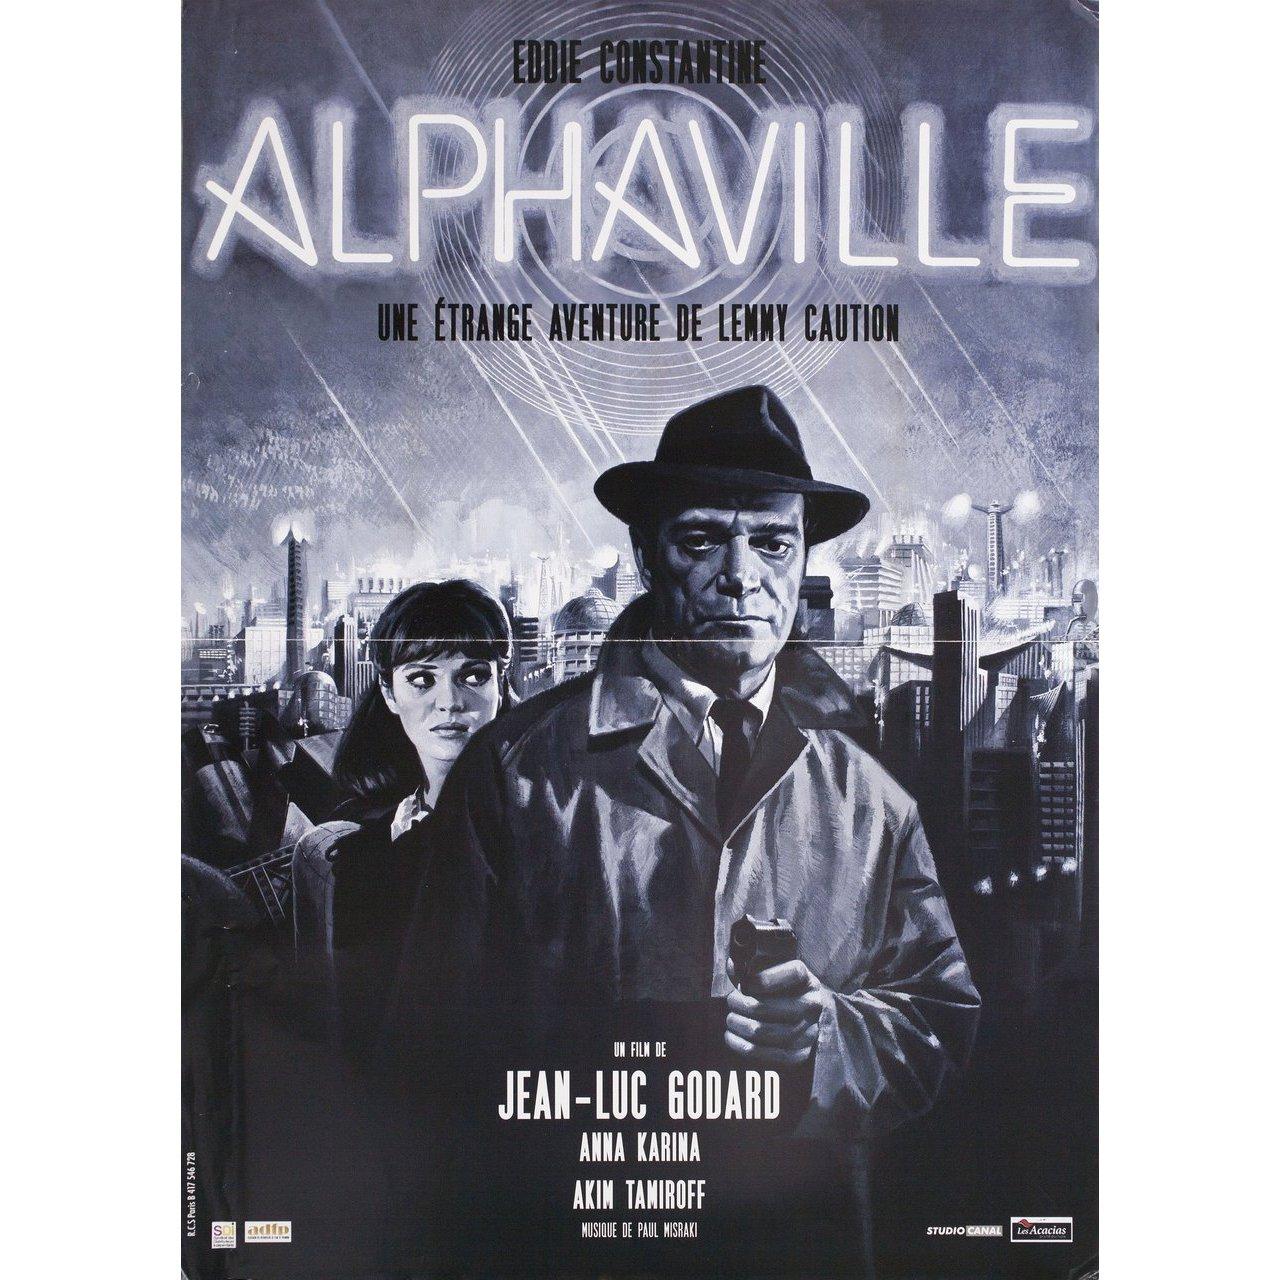 Original 2012 re-release French petite poster by Jean Mascii for the 1965 film Alphaville directed by Jean-Luc Godard with Eddie Constantine / Anna Karina / Akim Tamiroff. Very good-fine condition, folded with corner wear. Many original posters were